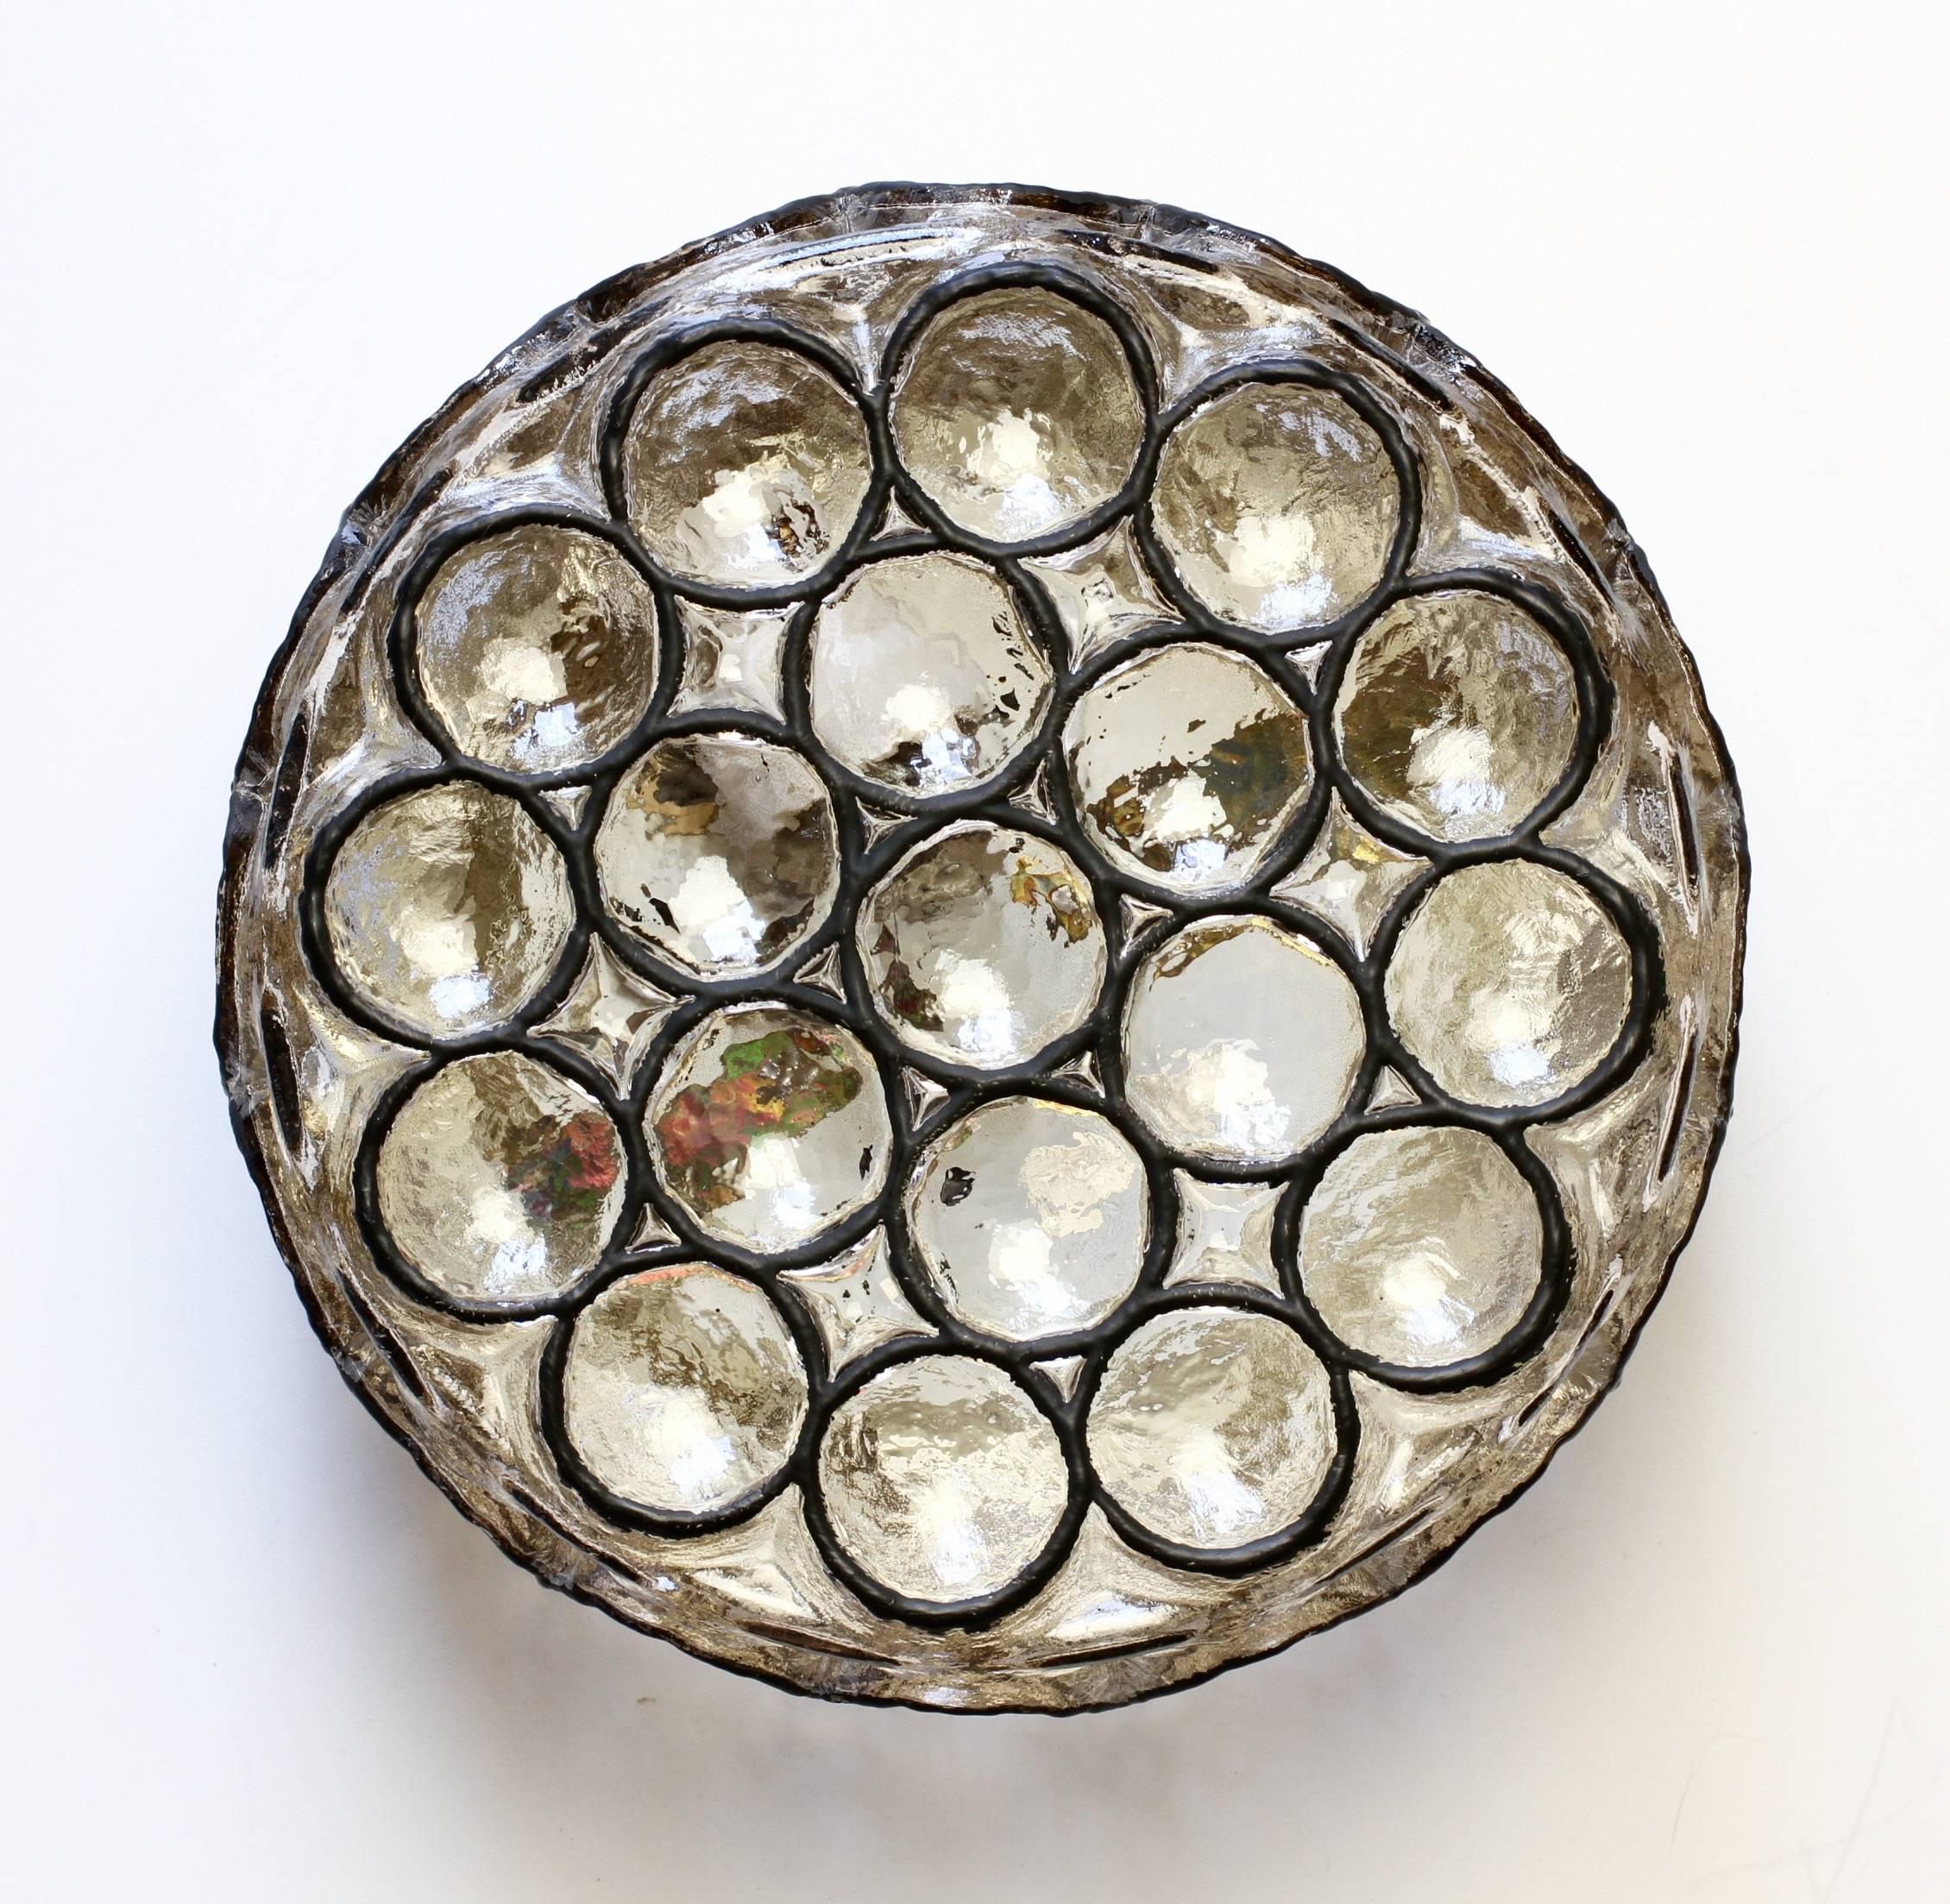 Limburg Glashütte pair of circular iron and glass flush mount lights / sconces made in Germany, circa 1965. Featuring thick heavy blown glass with concaved round 